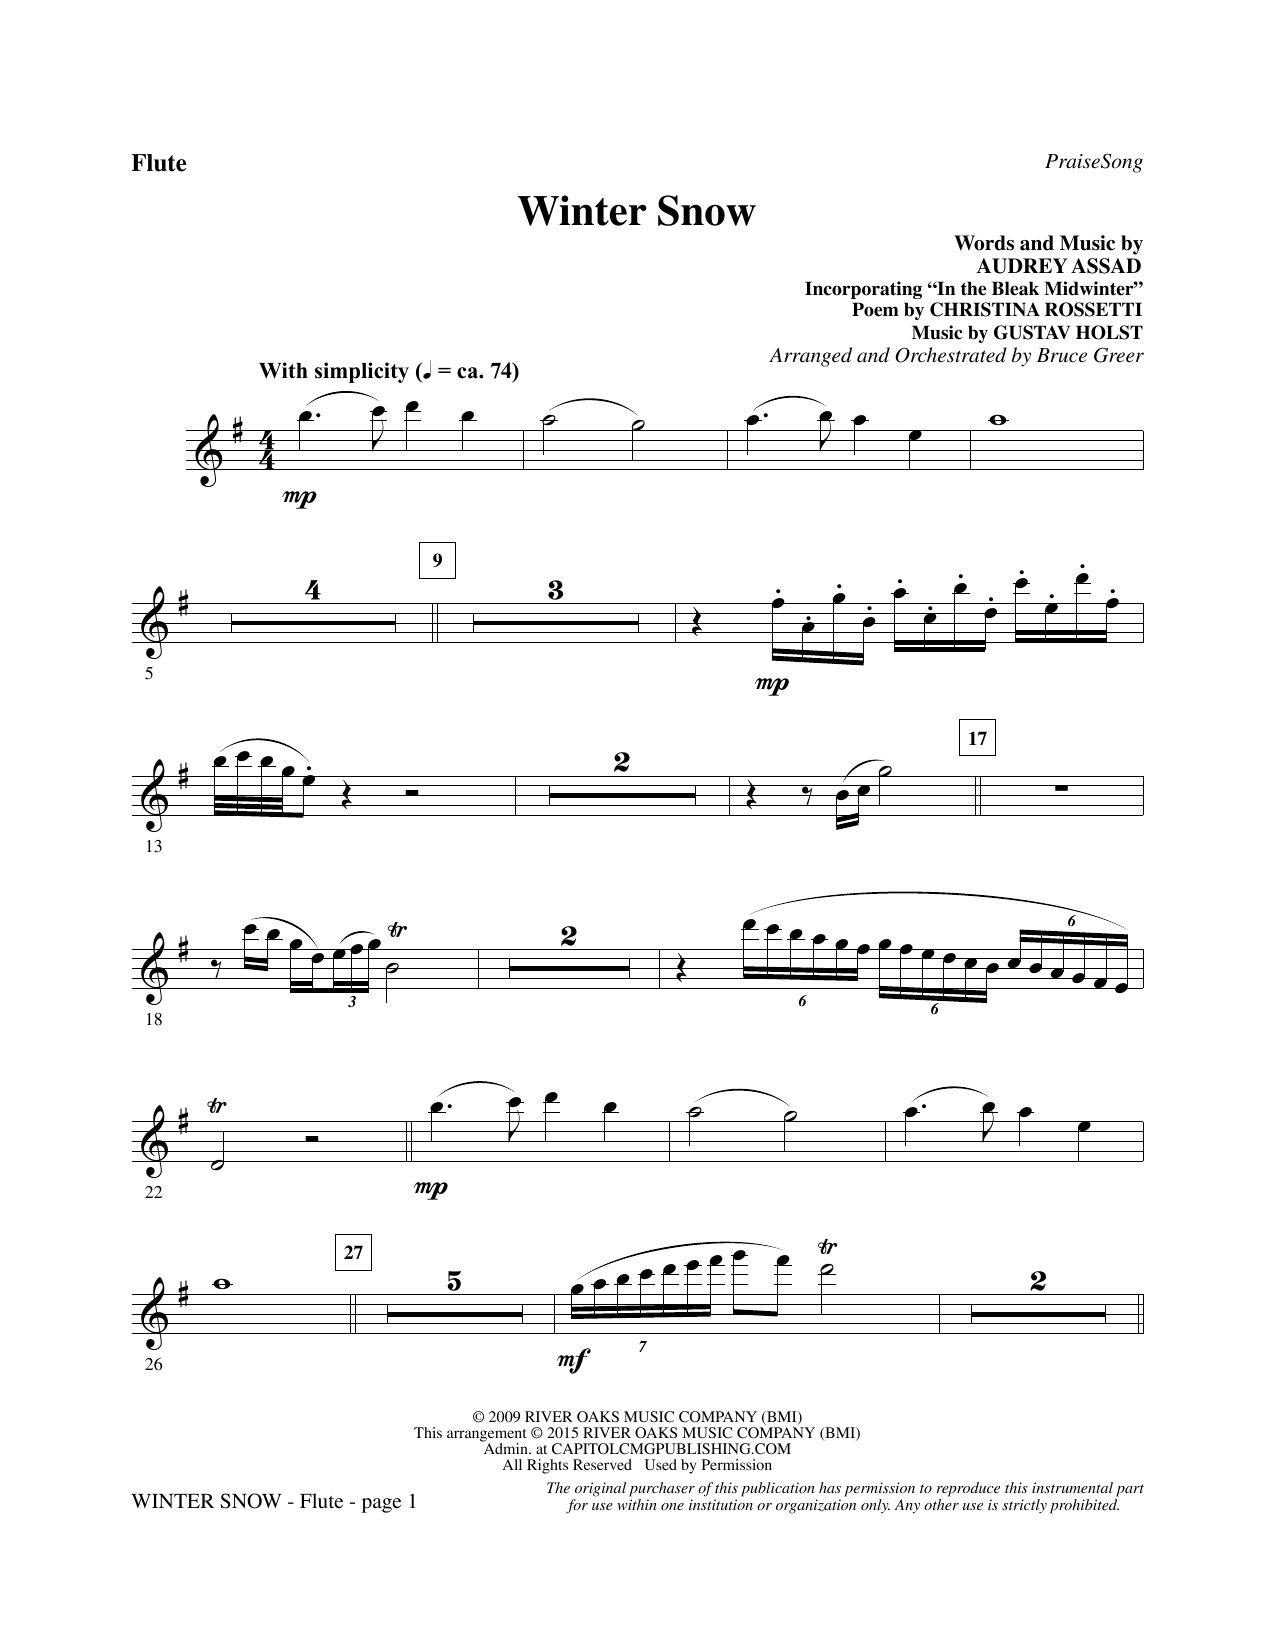 Bruce Greer Winter Snow - Flute sheet music notes and chords. Download Printable PDF.